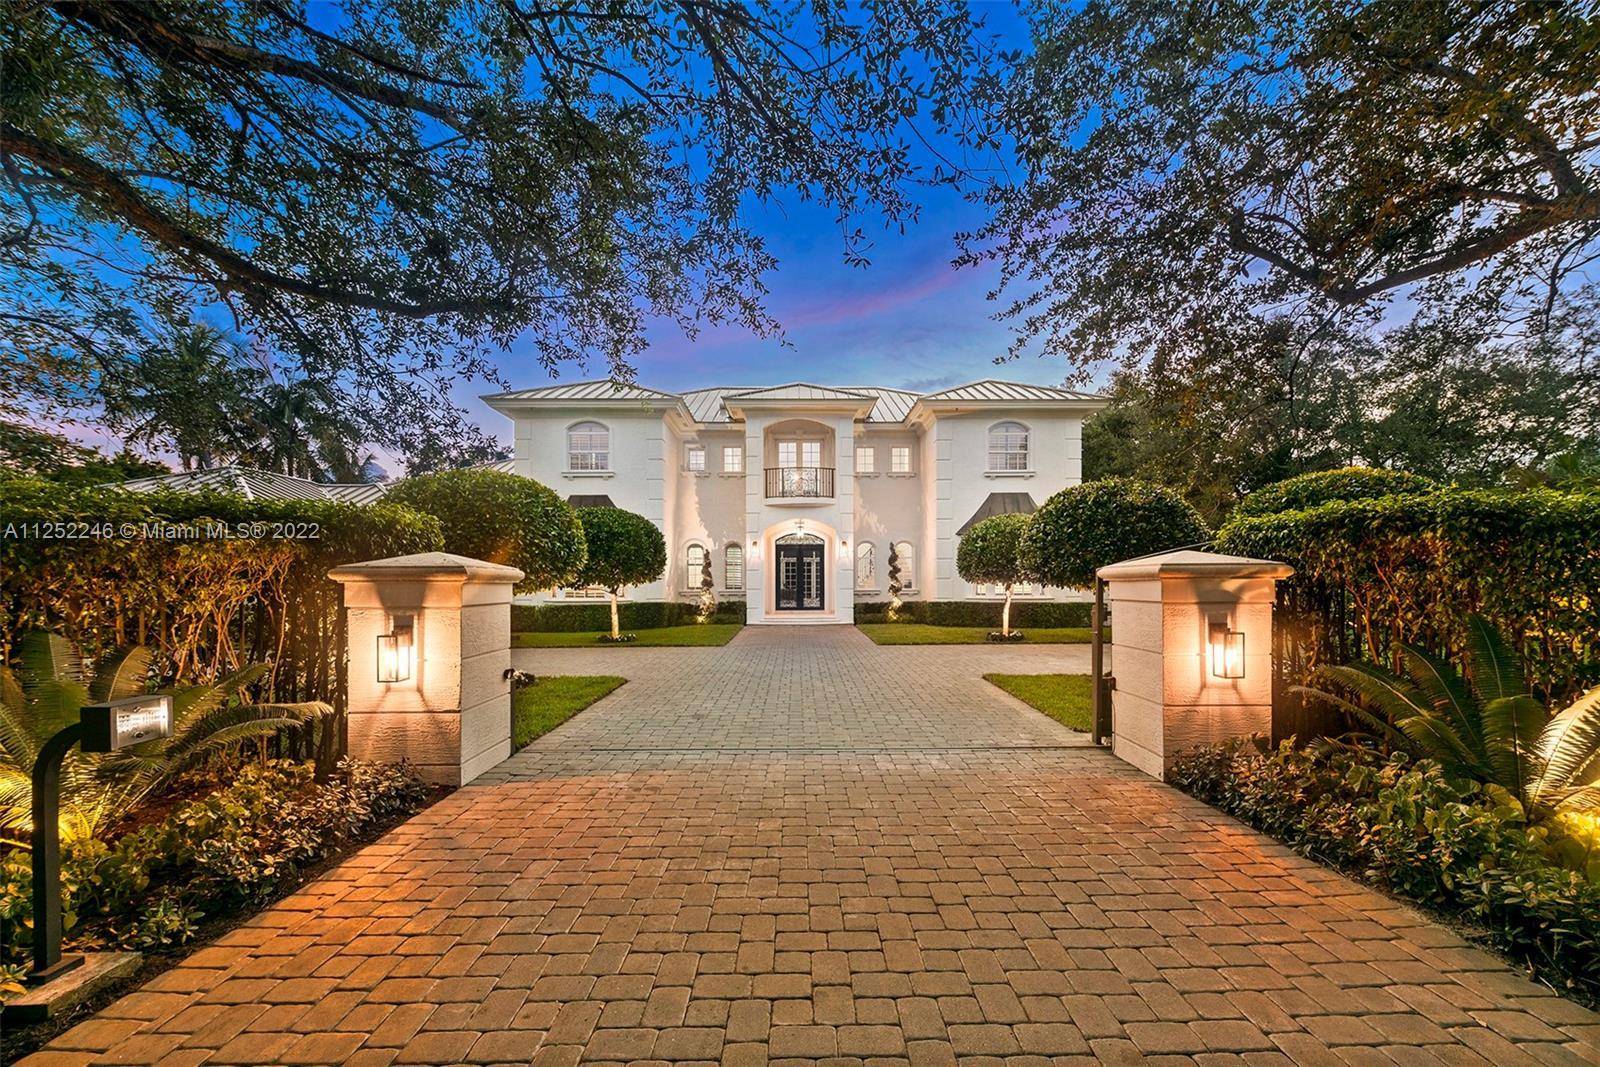 Stunning Classic Pinecrest estate! Impressive & imposing gated entry! Newly renovated/updated with c